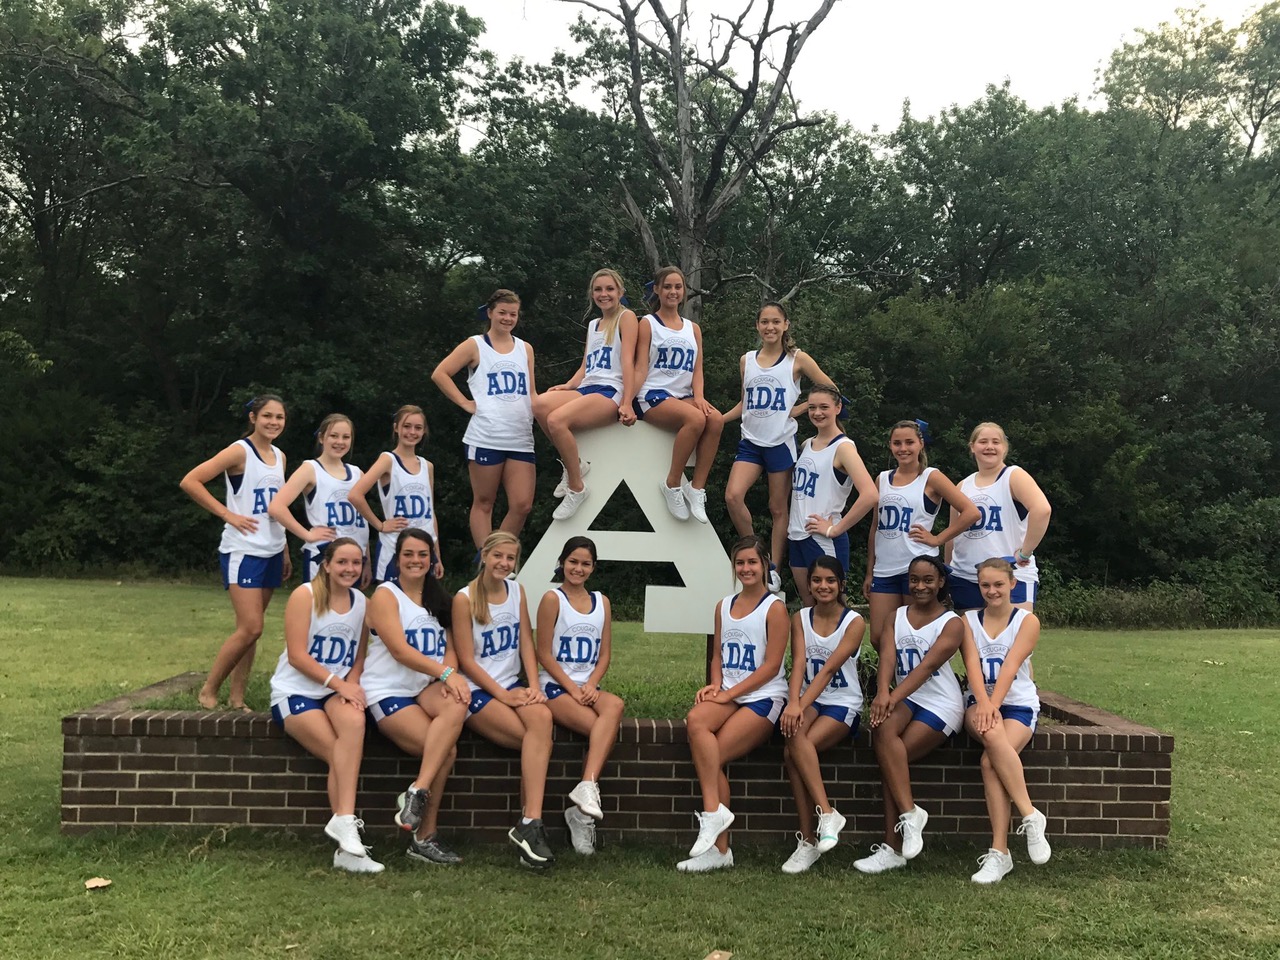 The+Ada+High+cheerleaders+pose+for+one+last+photo+before+heading+off+to+cheer+camp%2C+not+knowing+they+will+be+returning+with+a+bid+to+the+2018+NCA+All-Star+National+Competition+in+Dallas%2C+Texas.